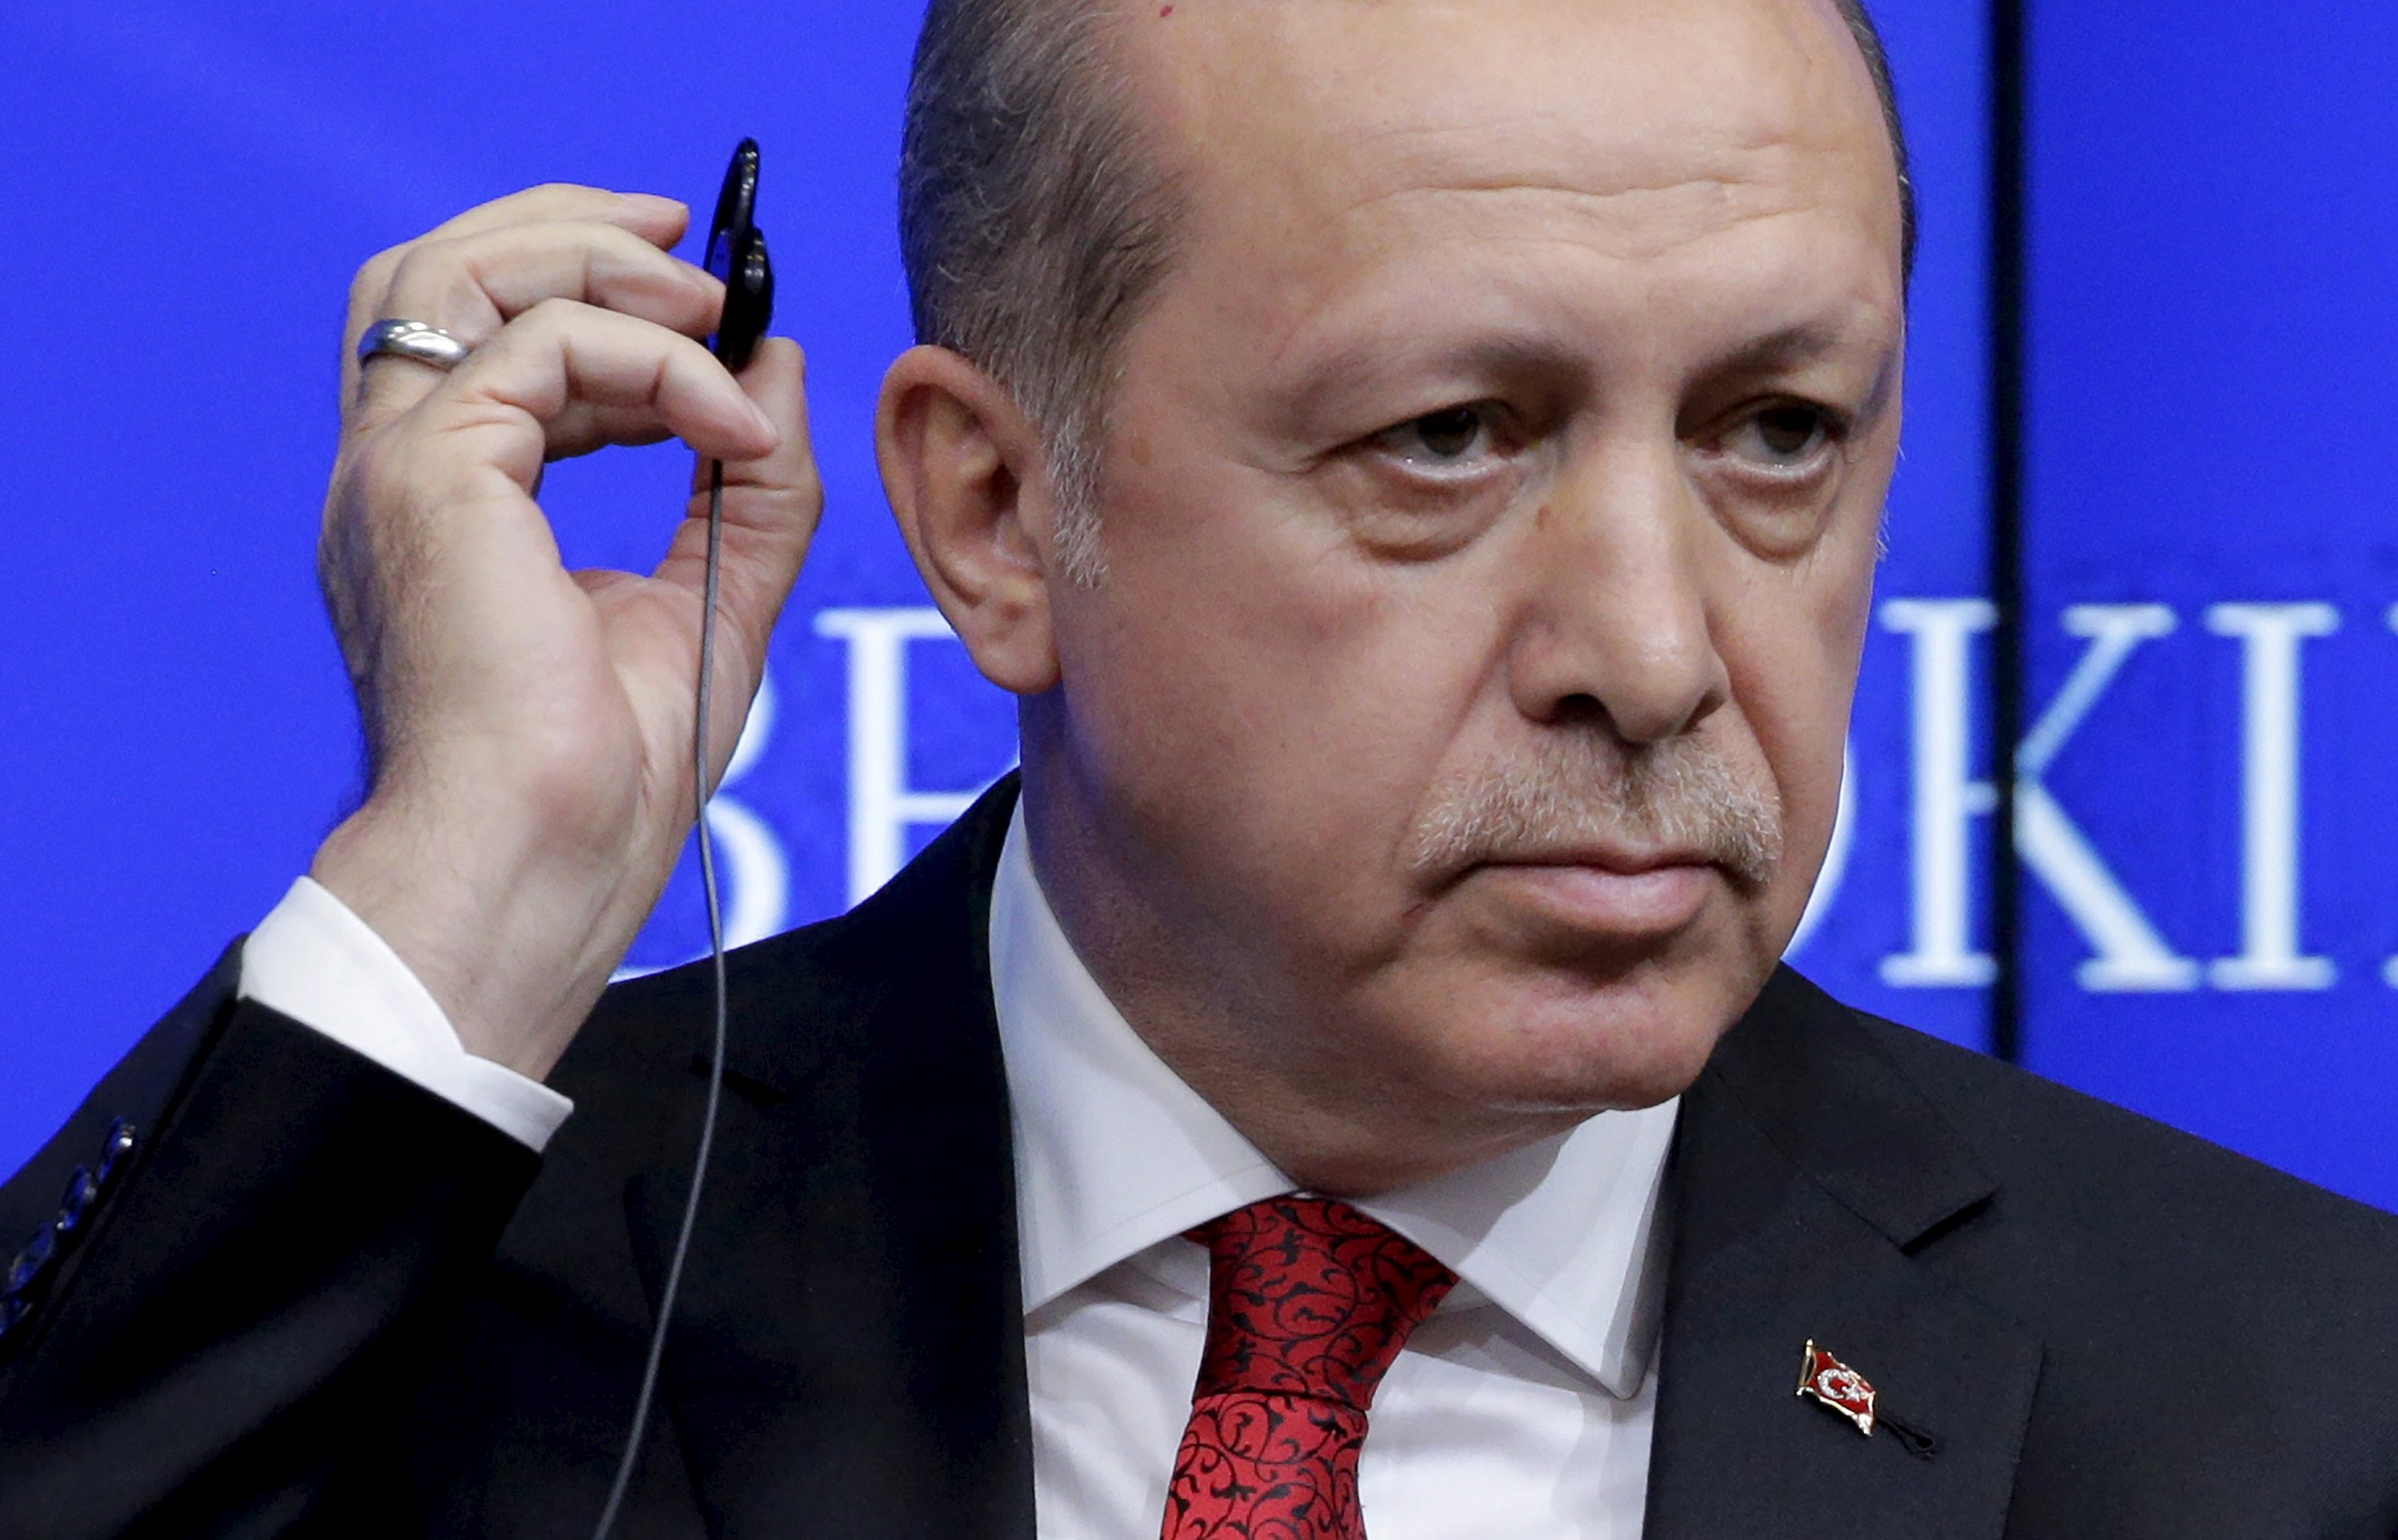 Turkish President Tayyip Erdogan removes his ear piece at the Brookings Institute in Washington March 31, 2016. REUTERS/Joshua Roberts